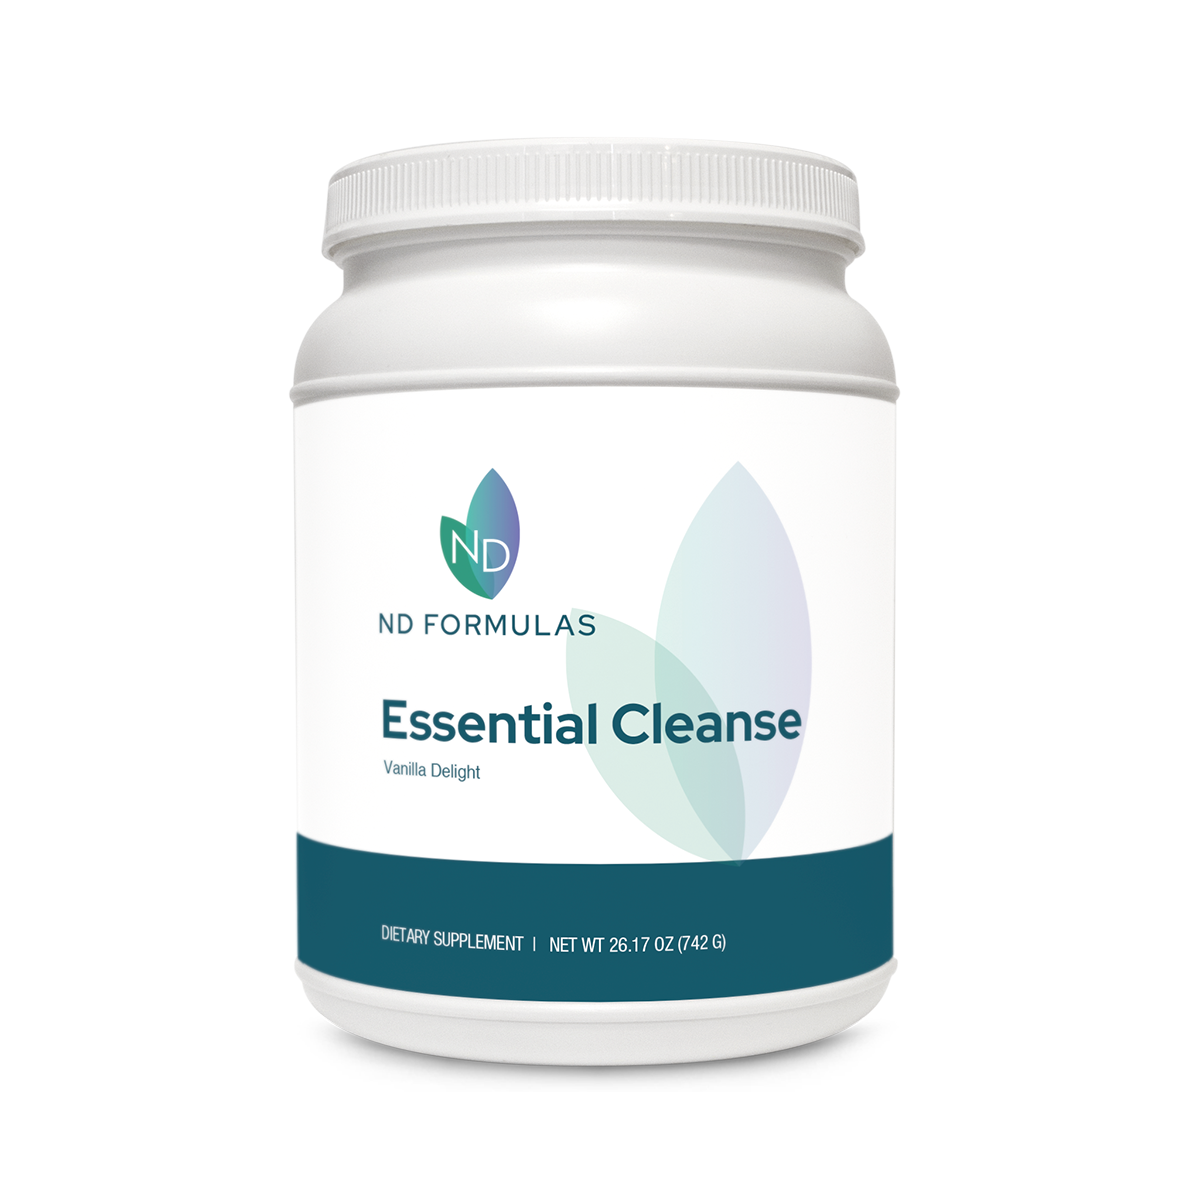 Essential Cleanse